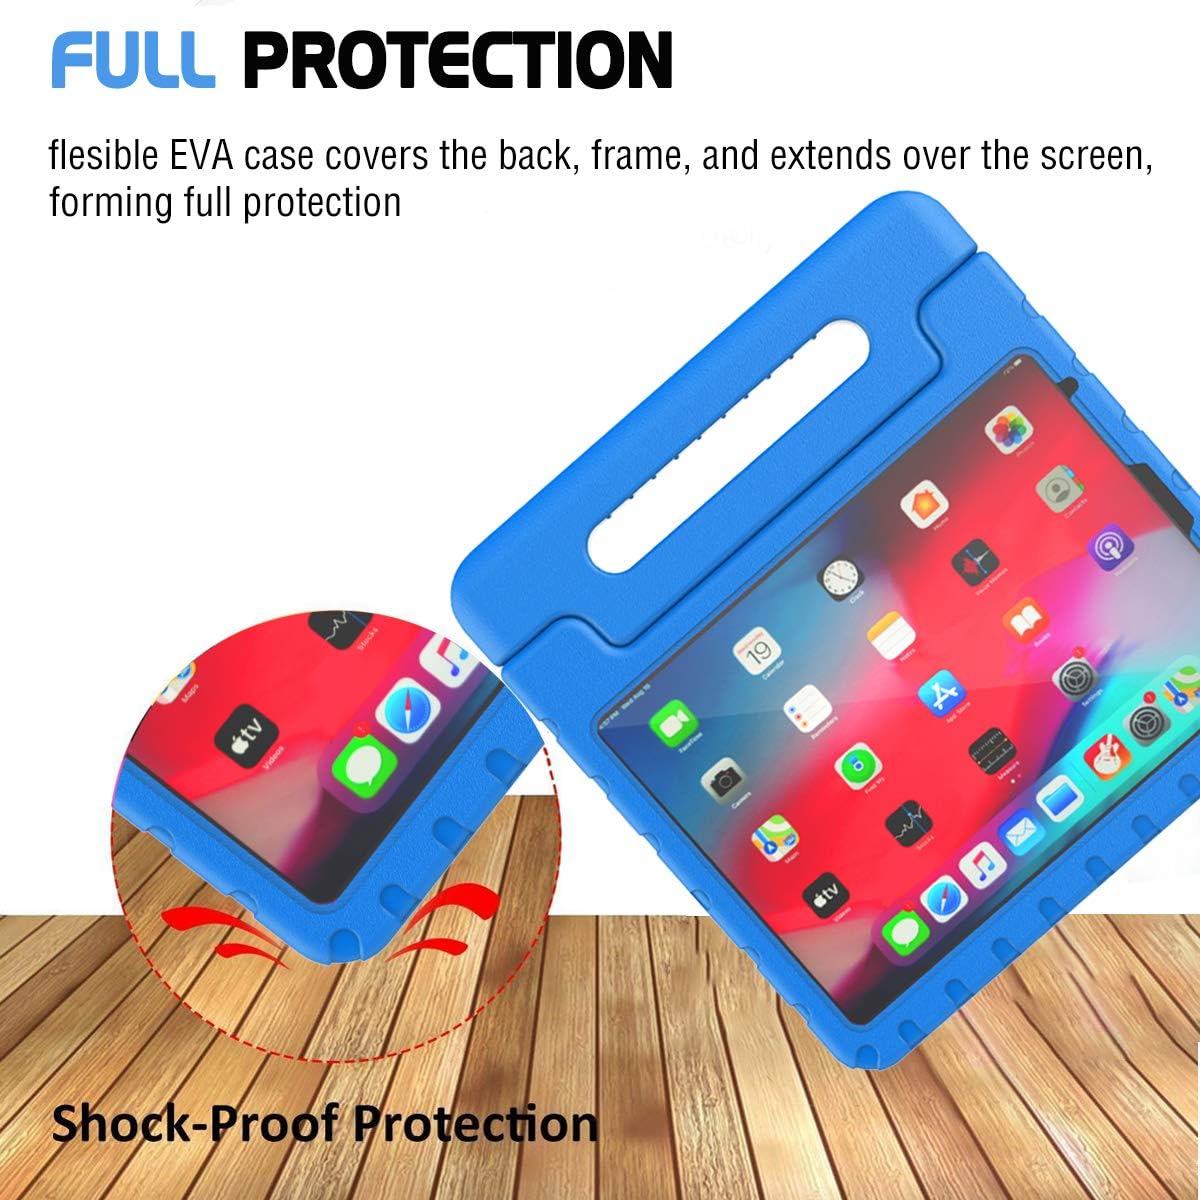 iPad 10.9 inch & 11 inch Shockproof Case w Handle & Stand for iPad Air 5th/4th Generation (10.9 inch) & iPad Pro 11inch (Blue) *Free Shipping*